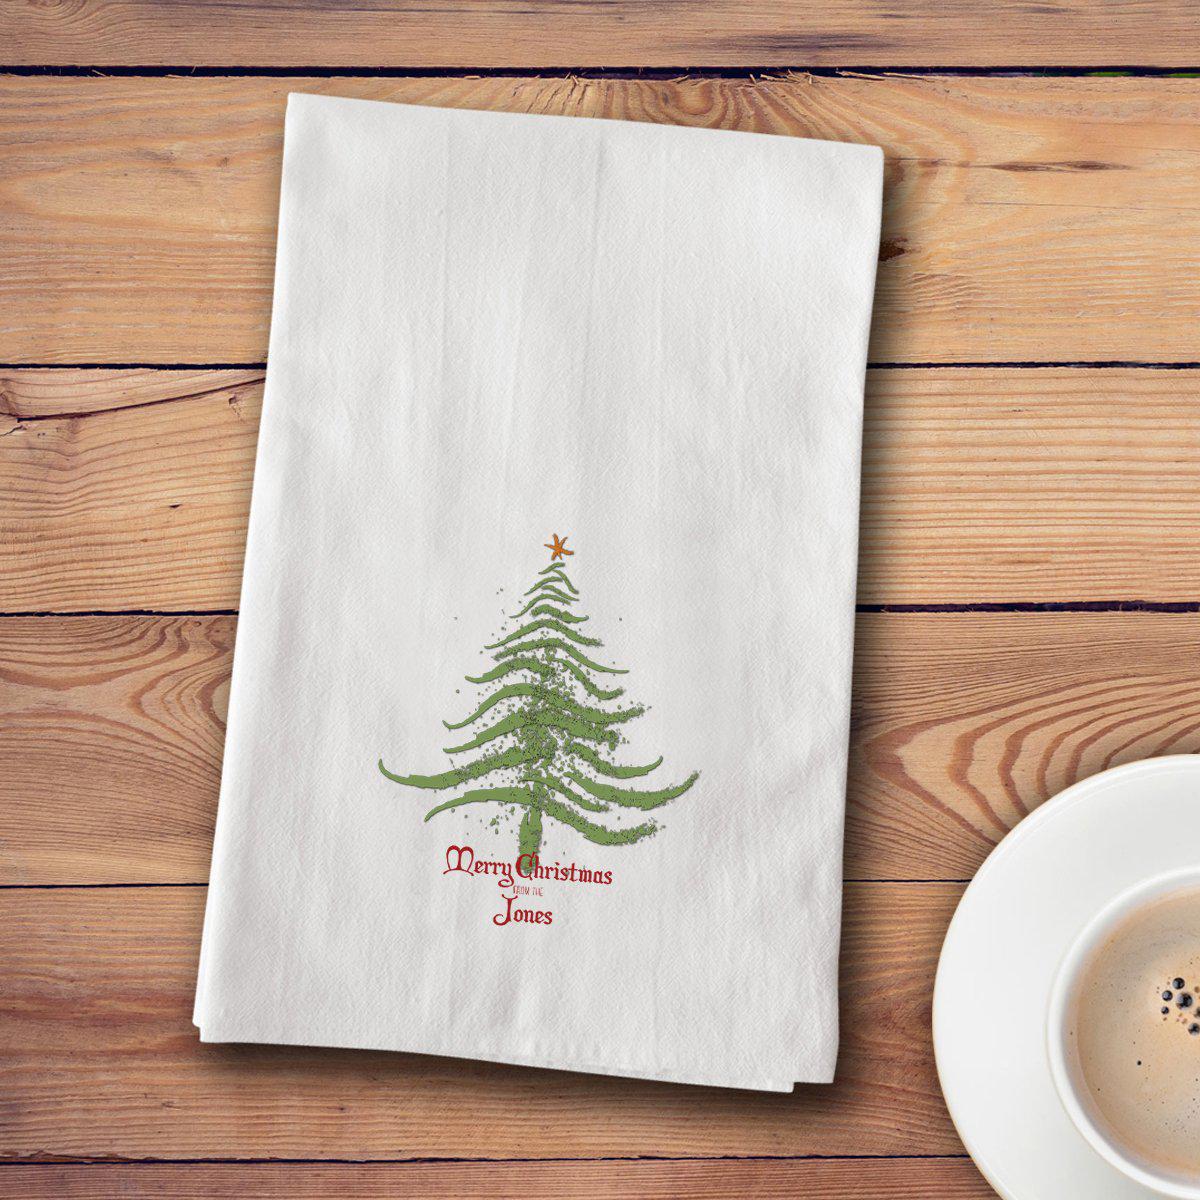 Personalized Christmas Tea Towels - 12 designs